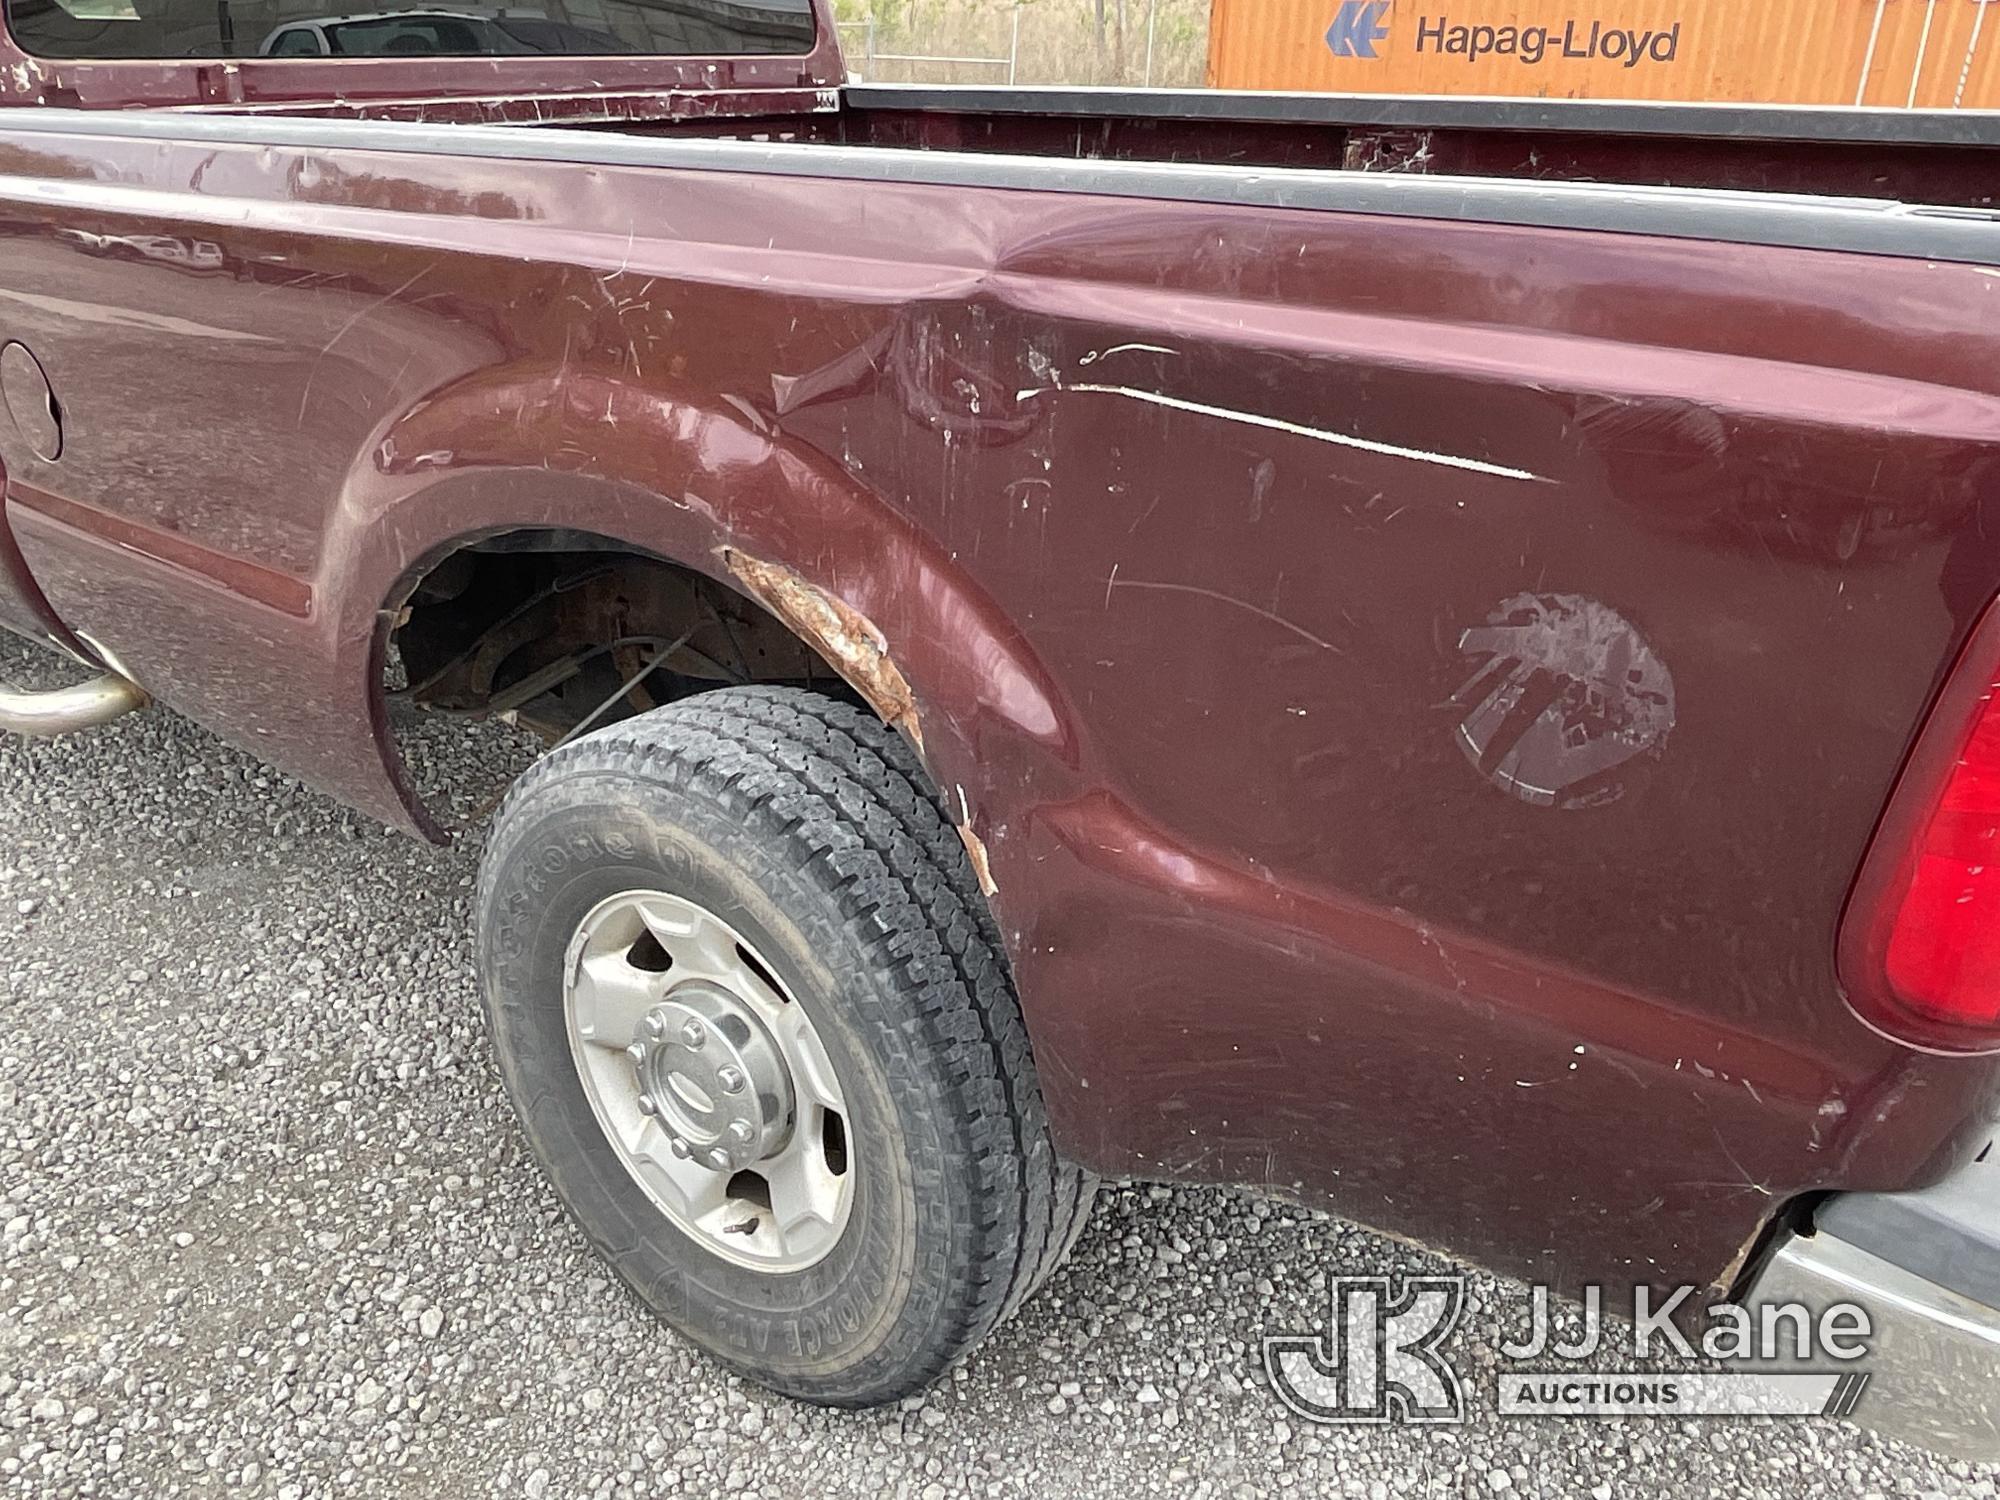 (Hobart, IN) 2010 Ford F250 4x4 Crew-Cab Pickup Truck Runs, Moves, Check Engine Light On) (Per Selle